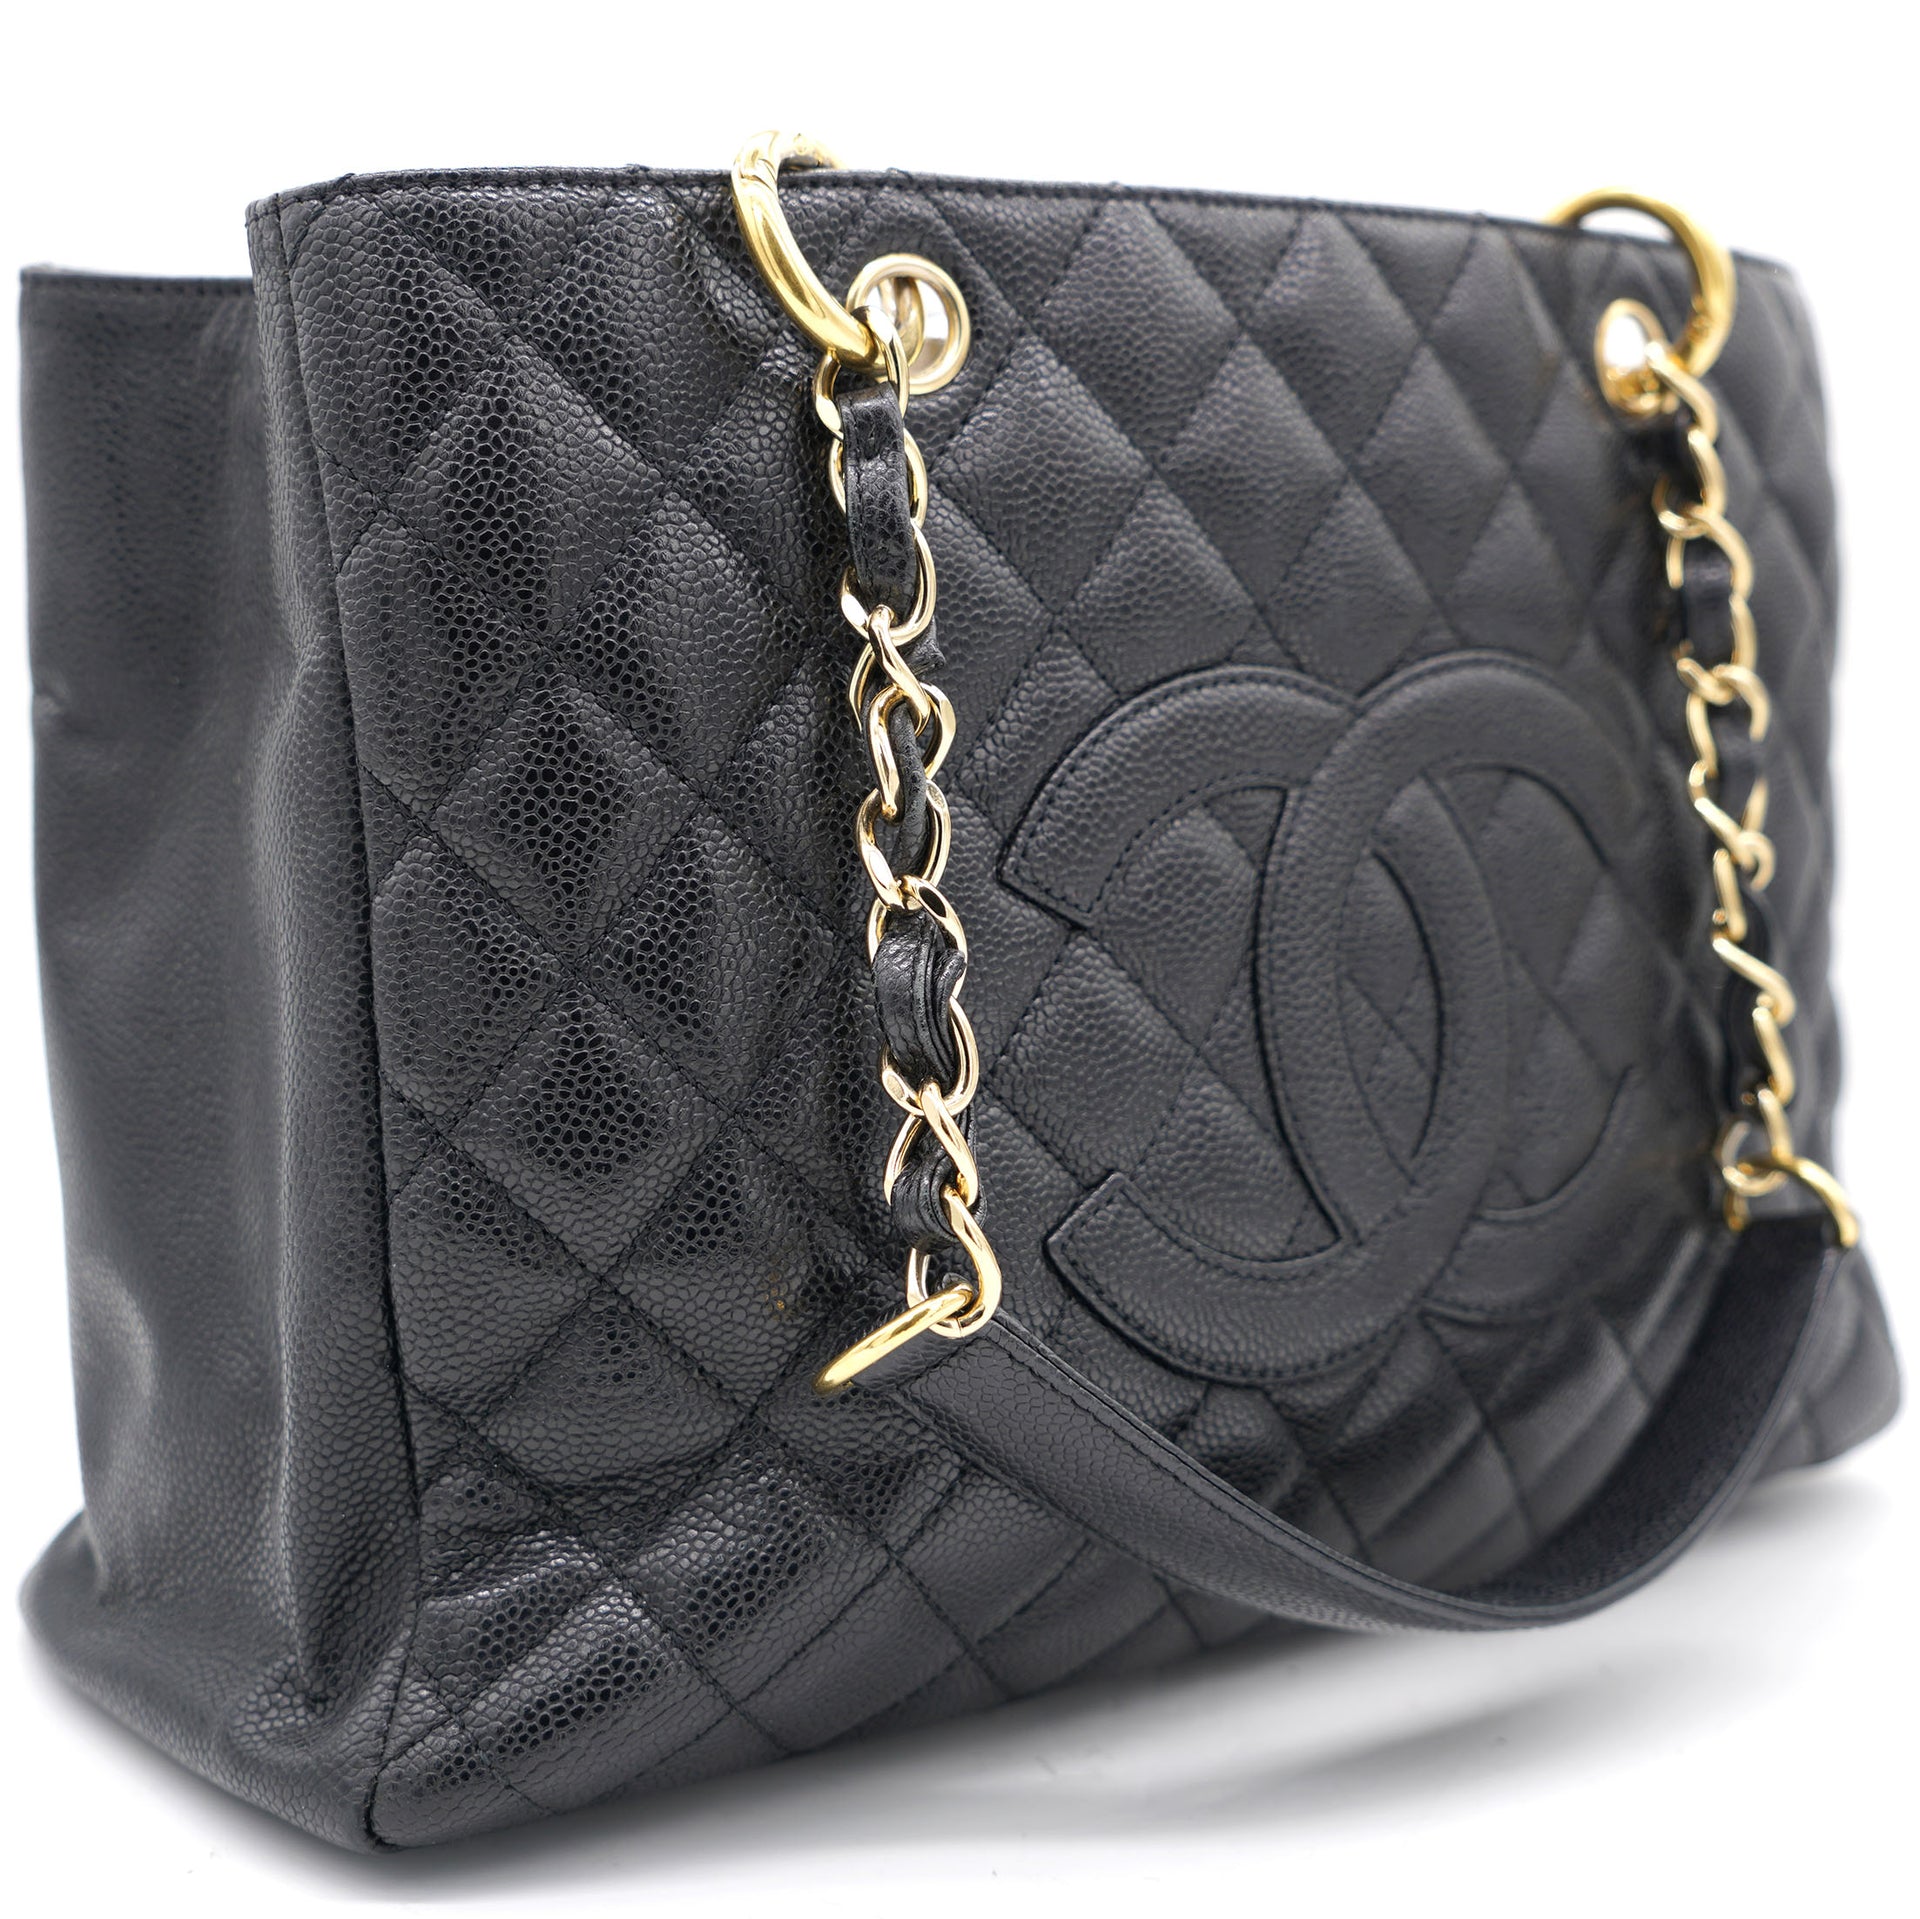 Chanel Beige Quilted Caviar Leather Grand Shopper GST Tote